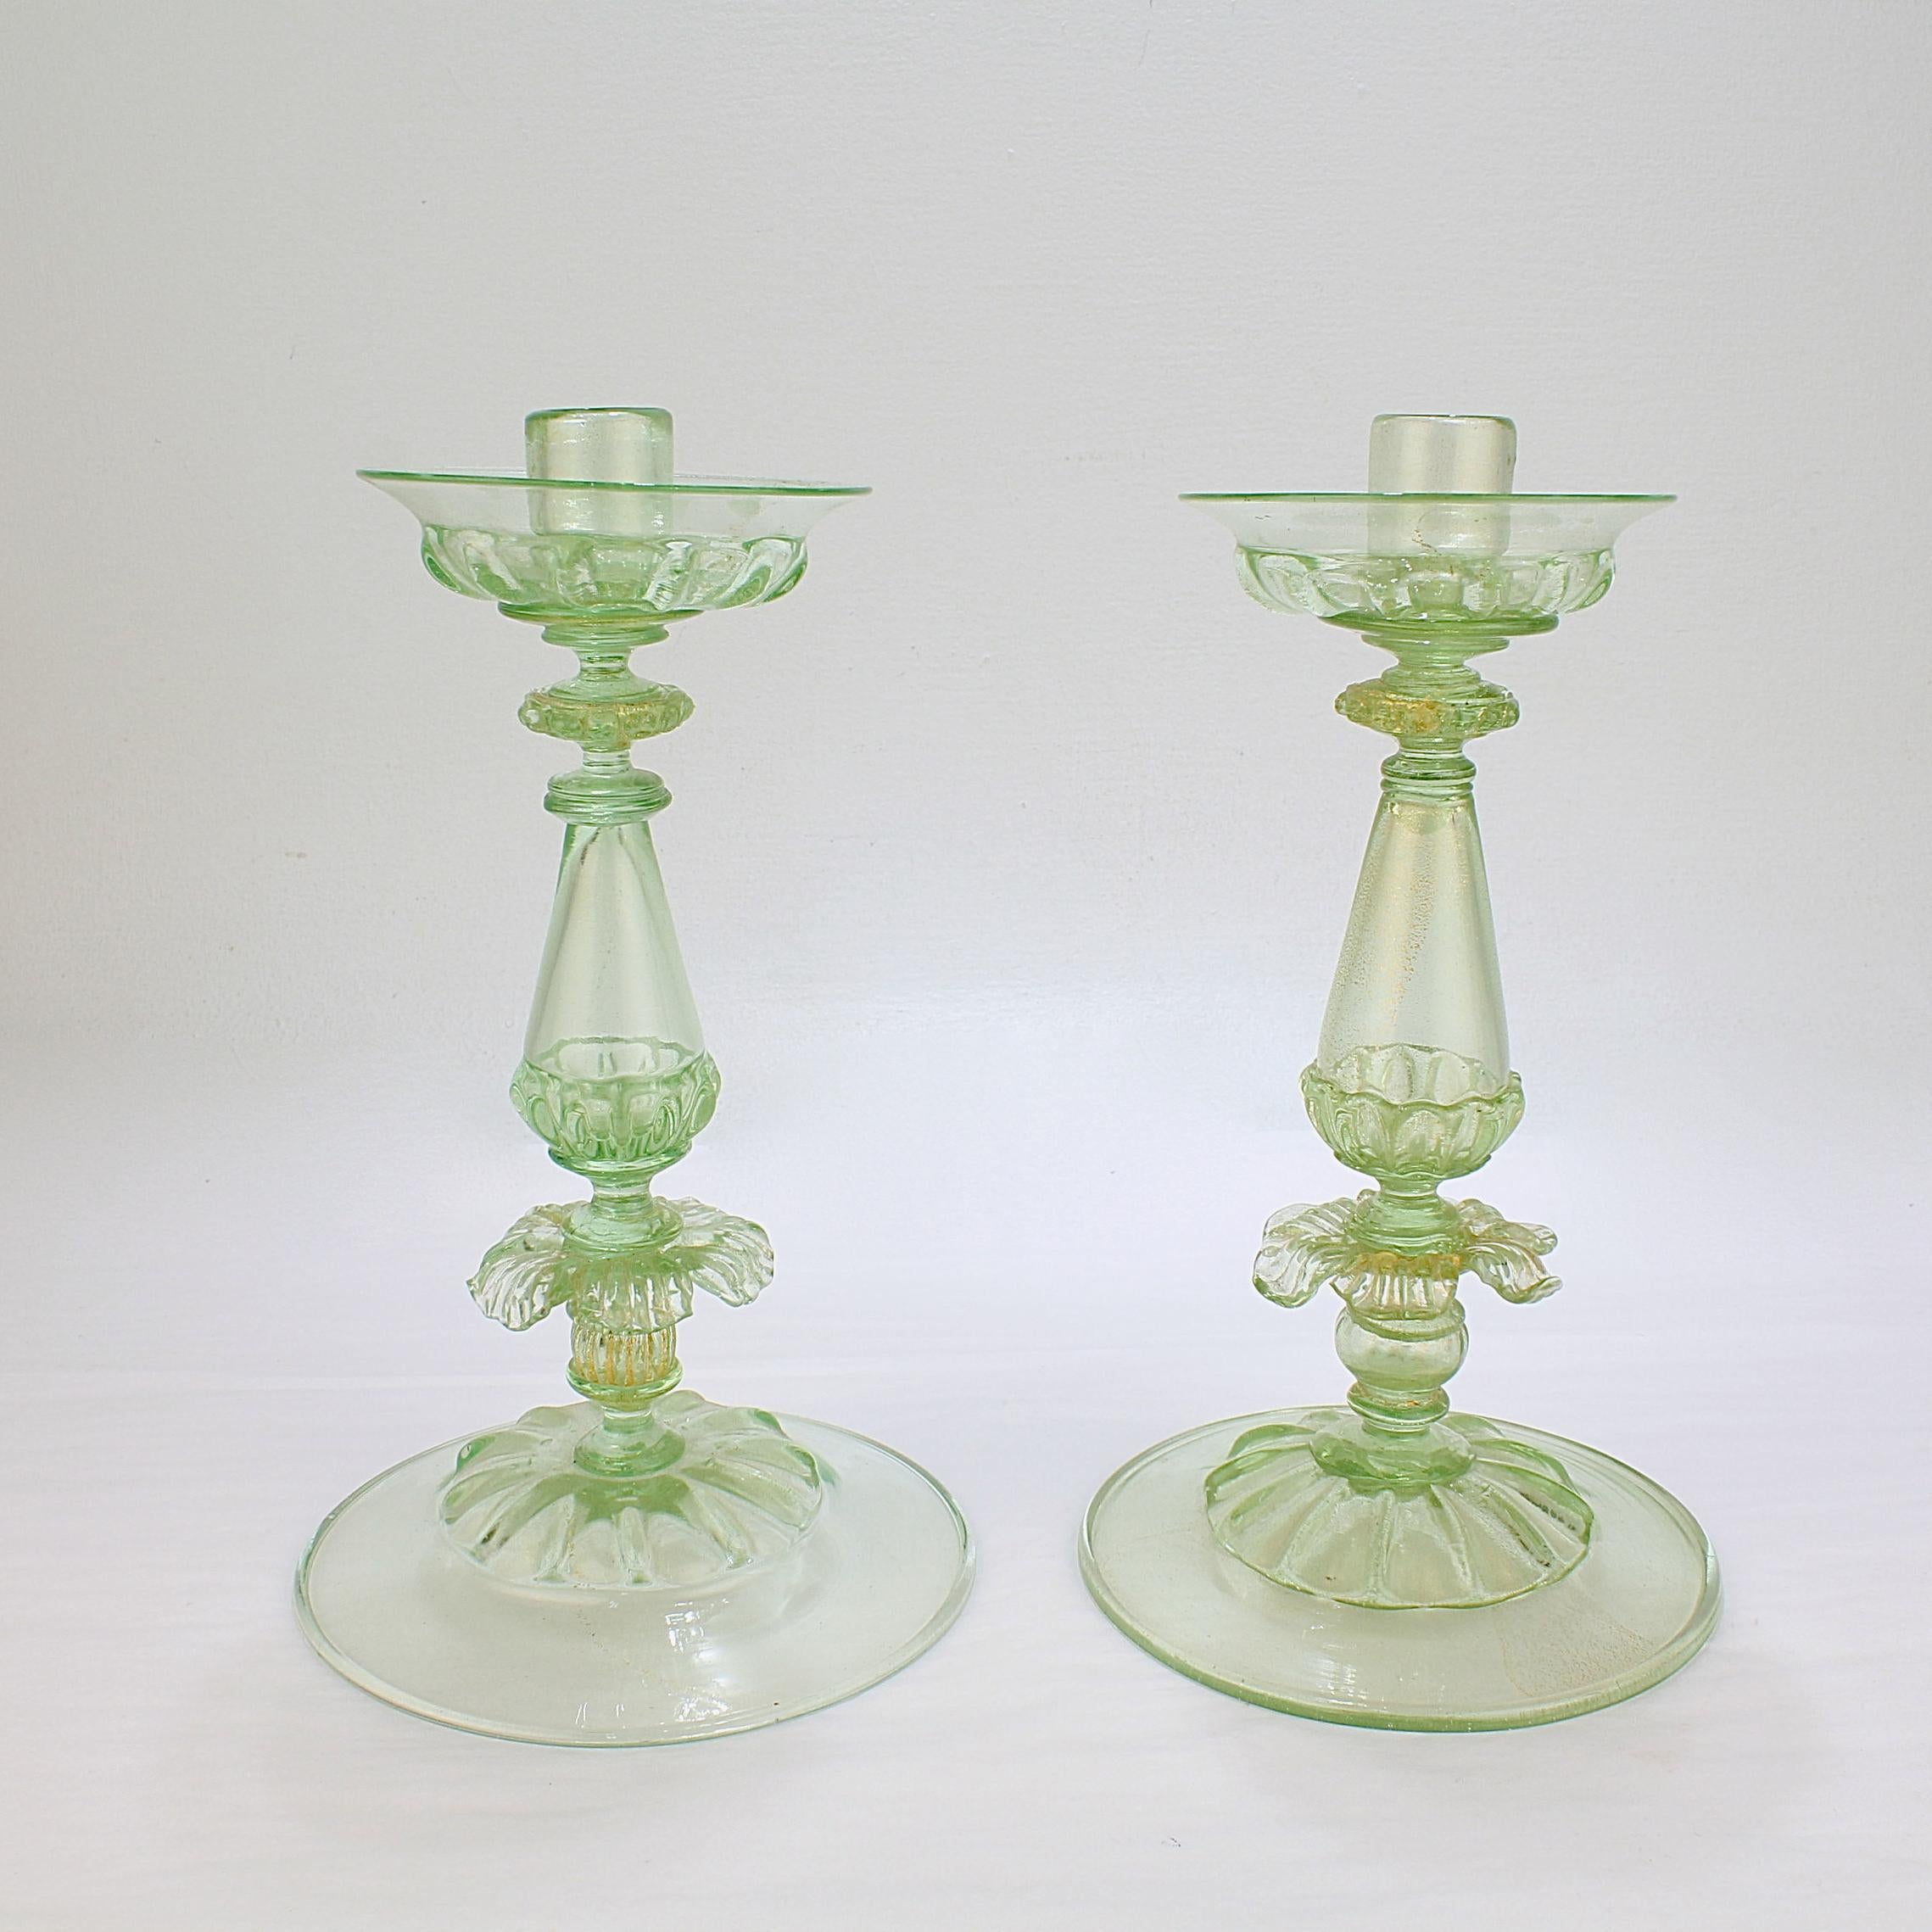 A fine pair of Venetian glass candlesticks. 

Attributed to Salviati.

 In lime green (almost uranium colored) glass with gold foil inclusions throughout.
 
With stylized floral decoration to the pedastal. 

Simply wonderful large-scale